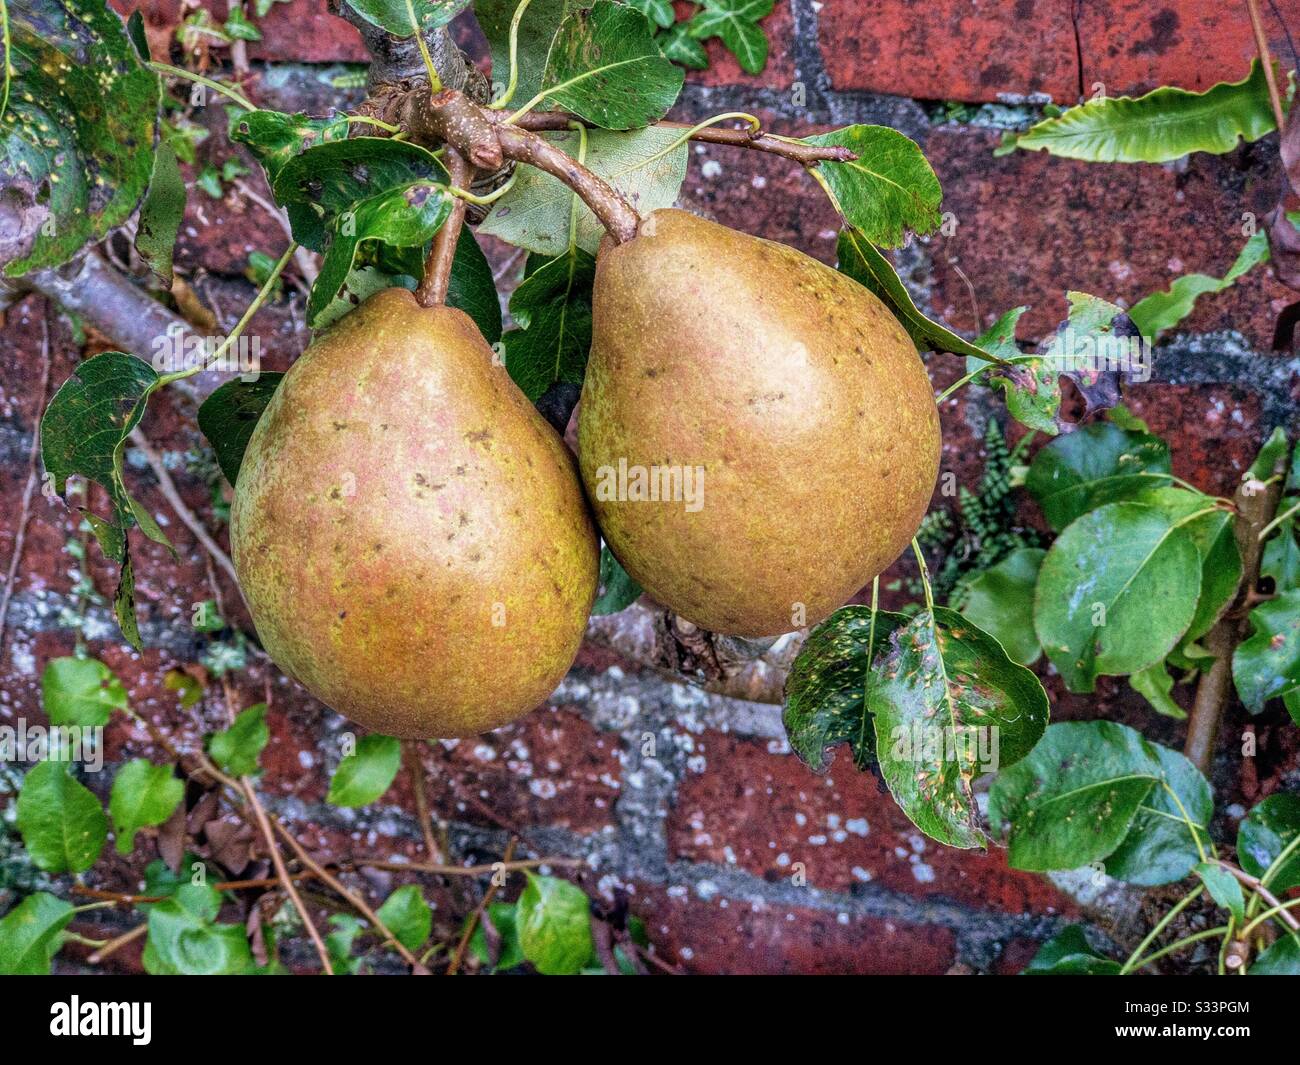 Pear Doyenne du Comice growing against a brick wall in a garden. Stock Photo